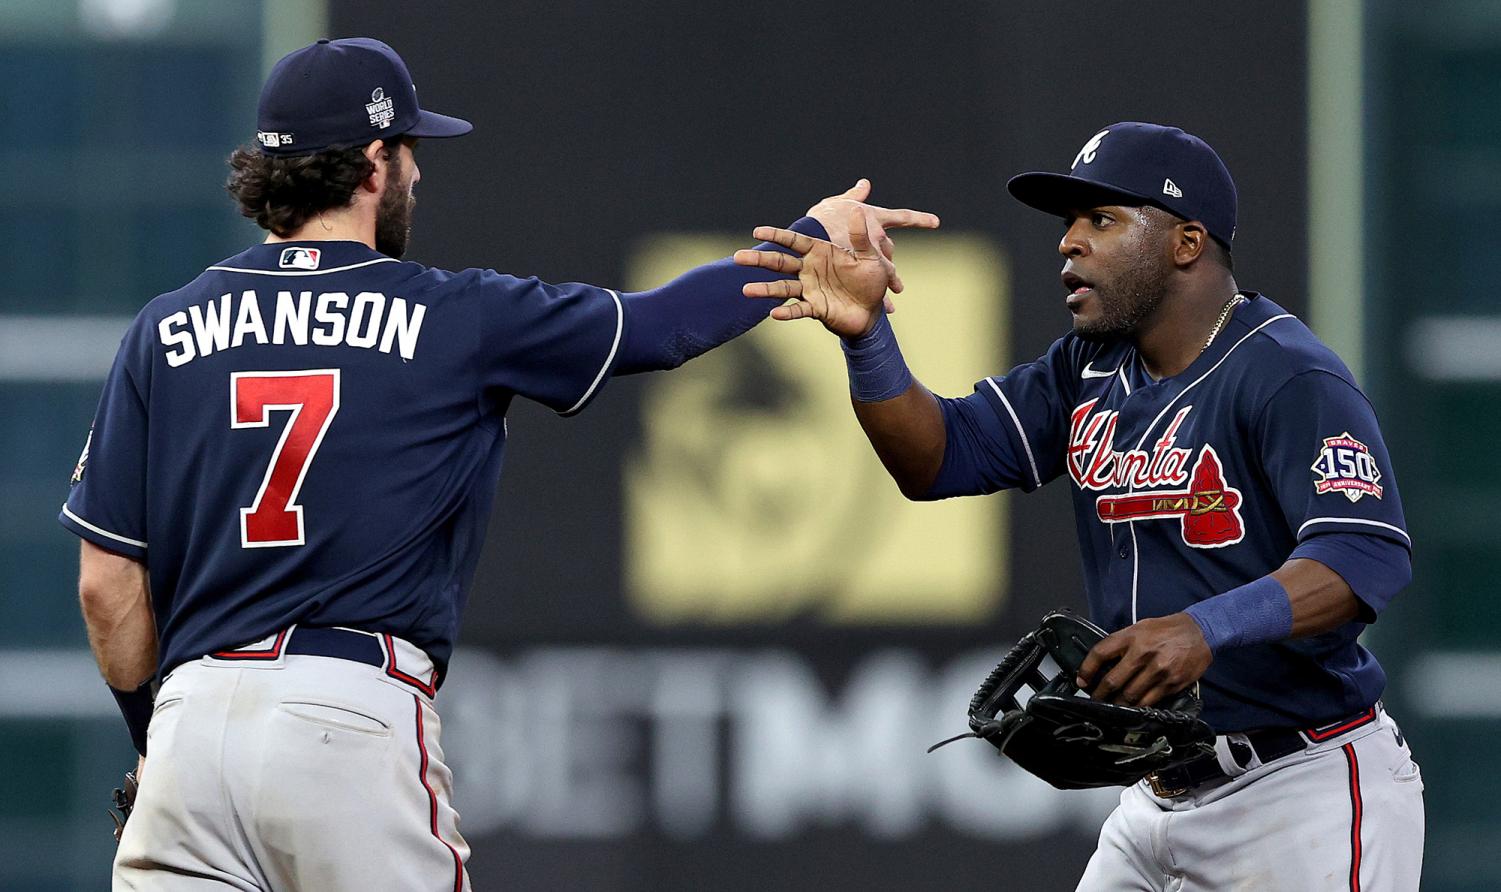 Braves+take+on+Astros+in+2021+World+Series